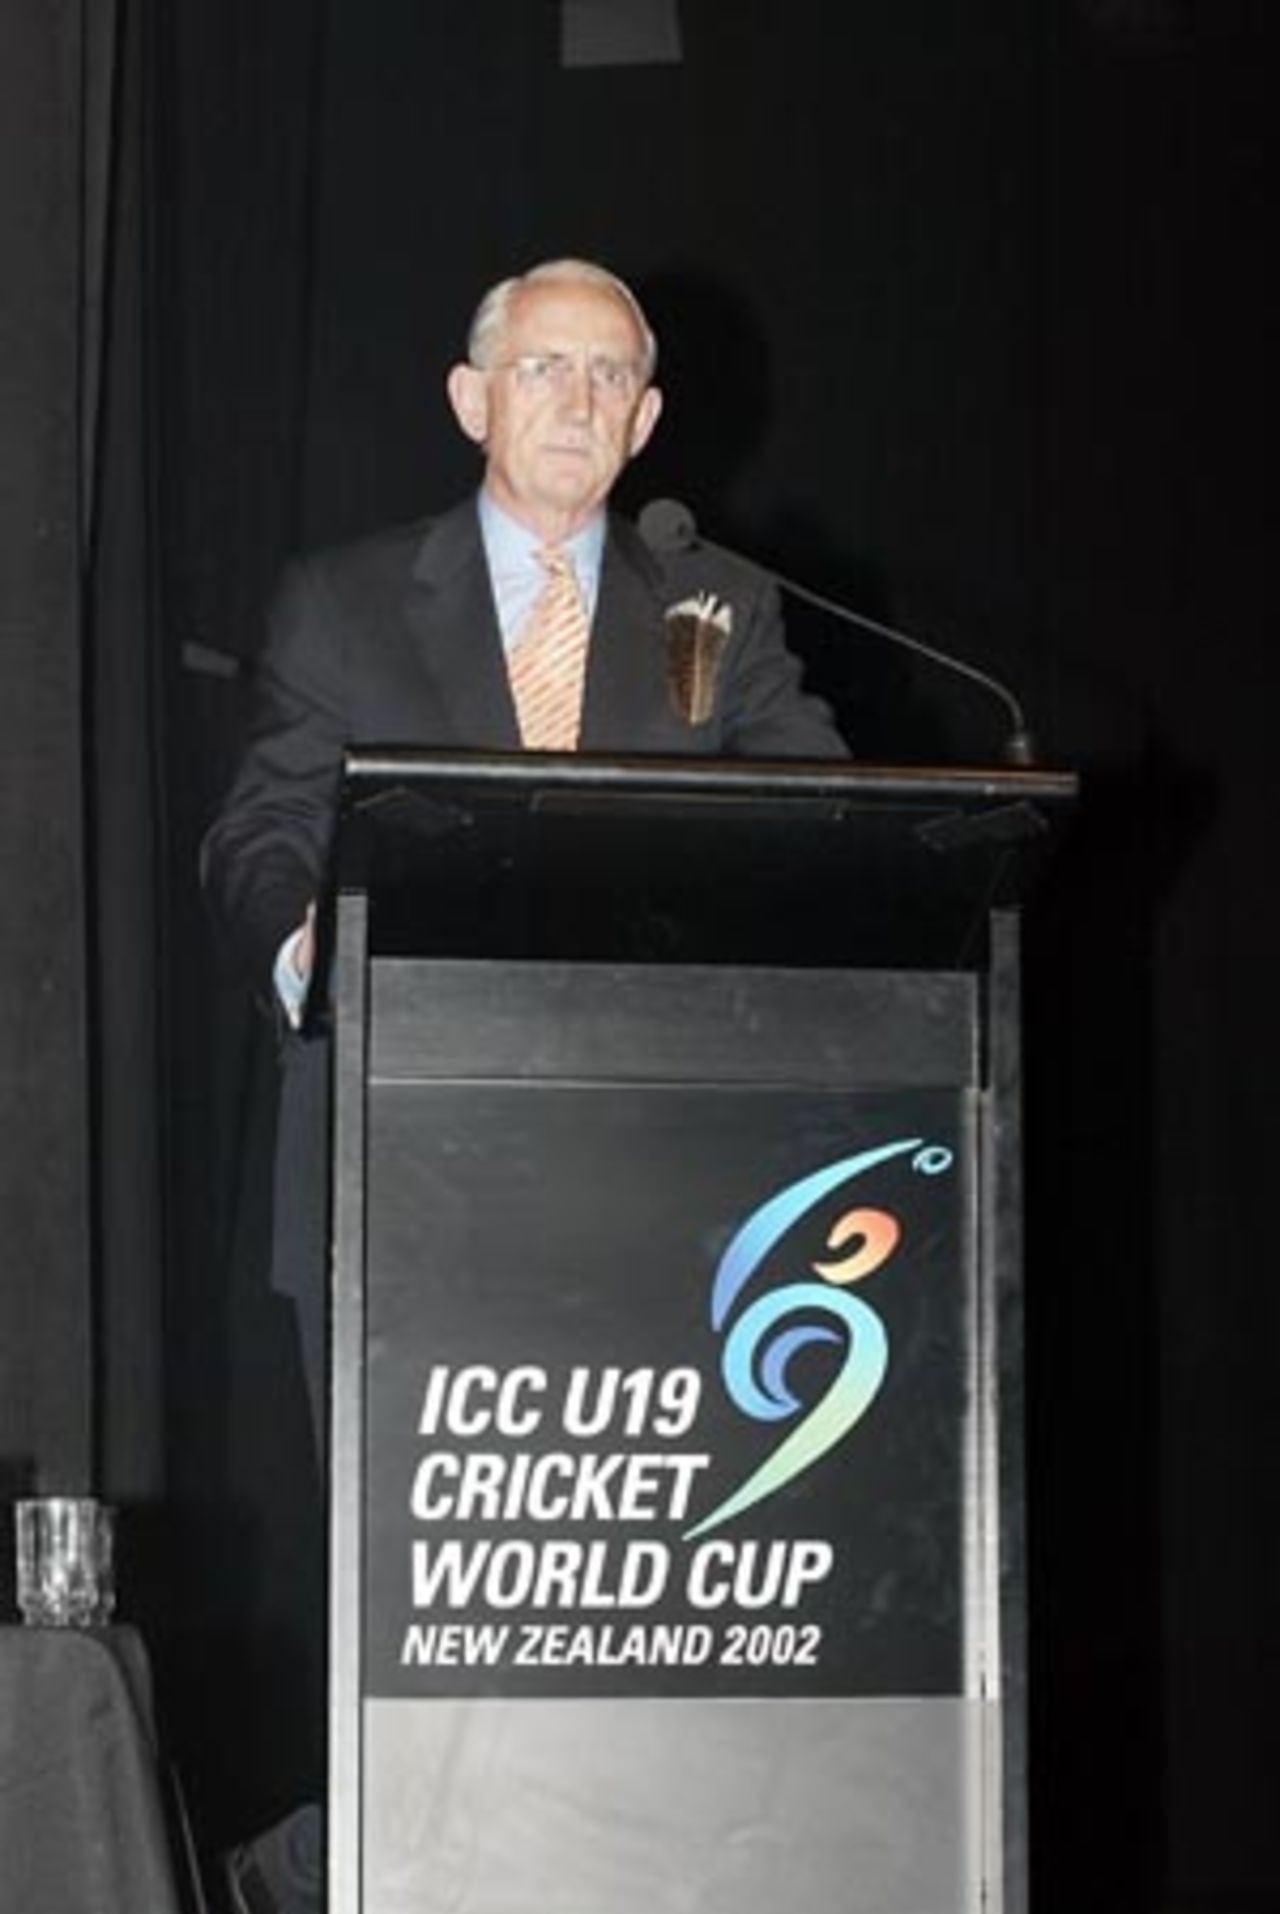 ICC president Malcolm Gray delivers a speech at the ICC Under-19 World Cup opening ceremony at the Christchurch Convention Centre. 14 January 2002.